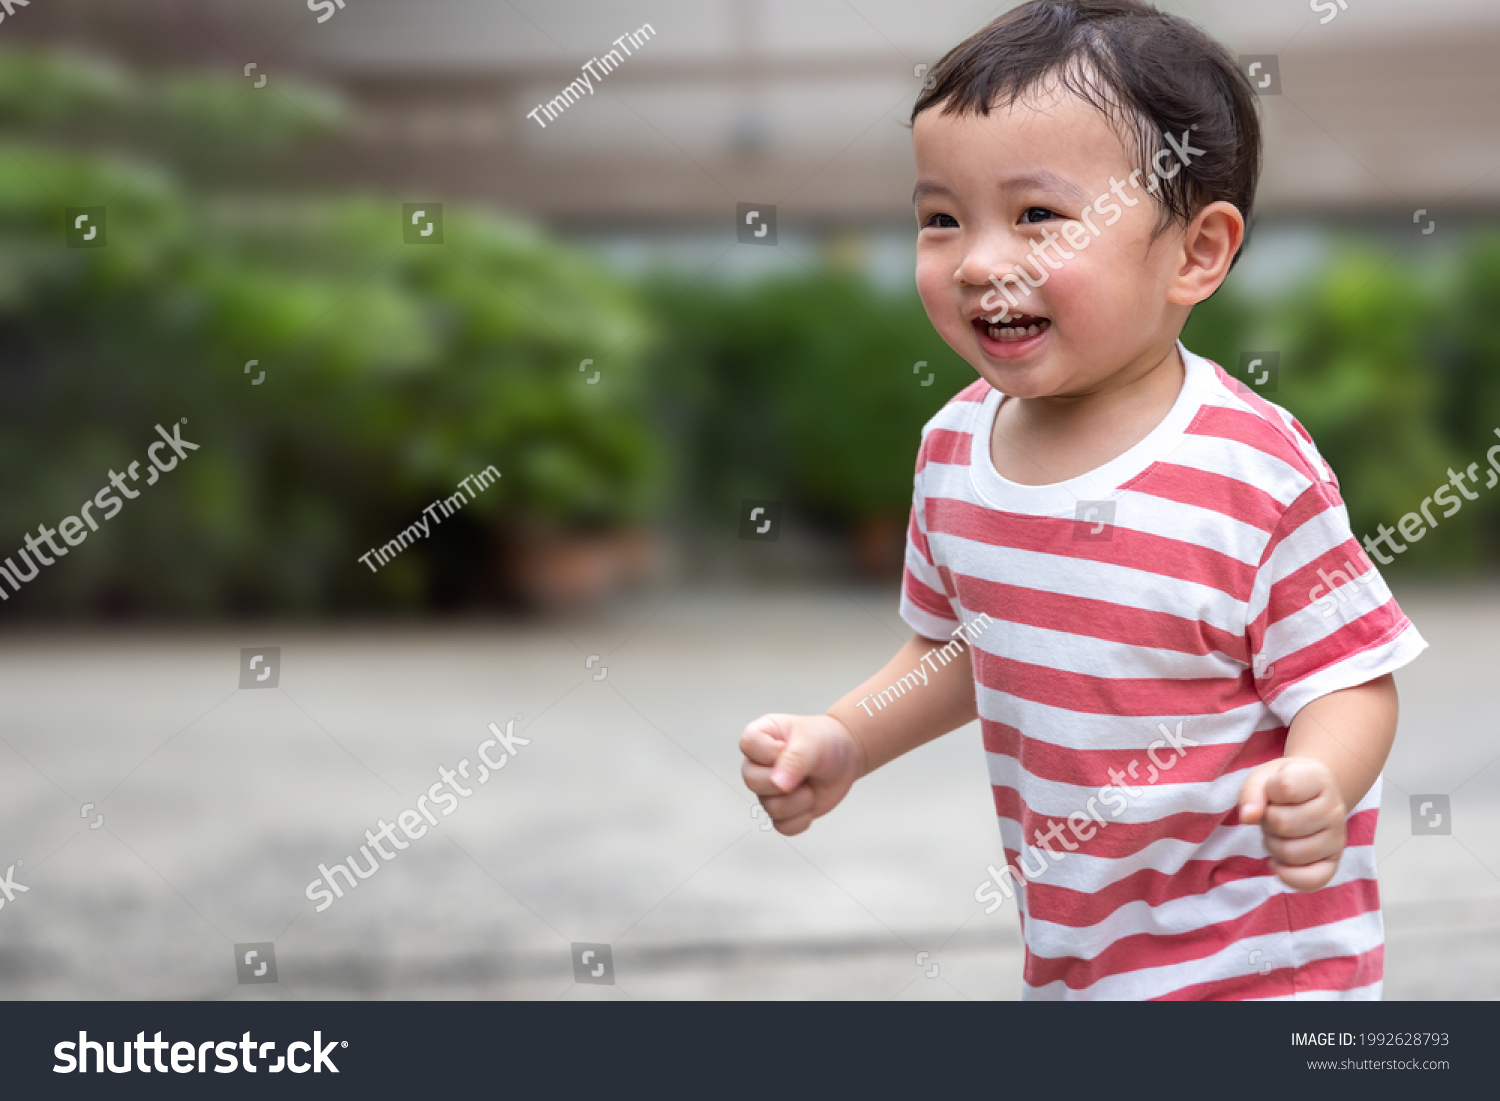 Portrait of an asian boy (toddler) running toward and smiling with happy and fun face while playing outdoor. A Child wear striped shirt in red and white color. Head and hair is wet by sweat. #1992628793